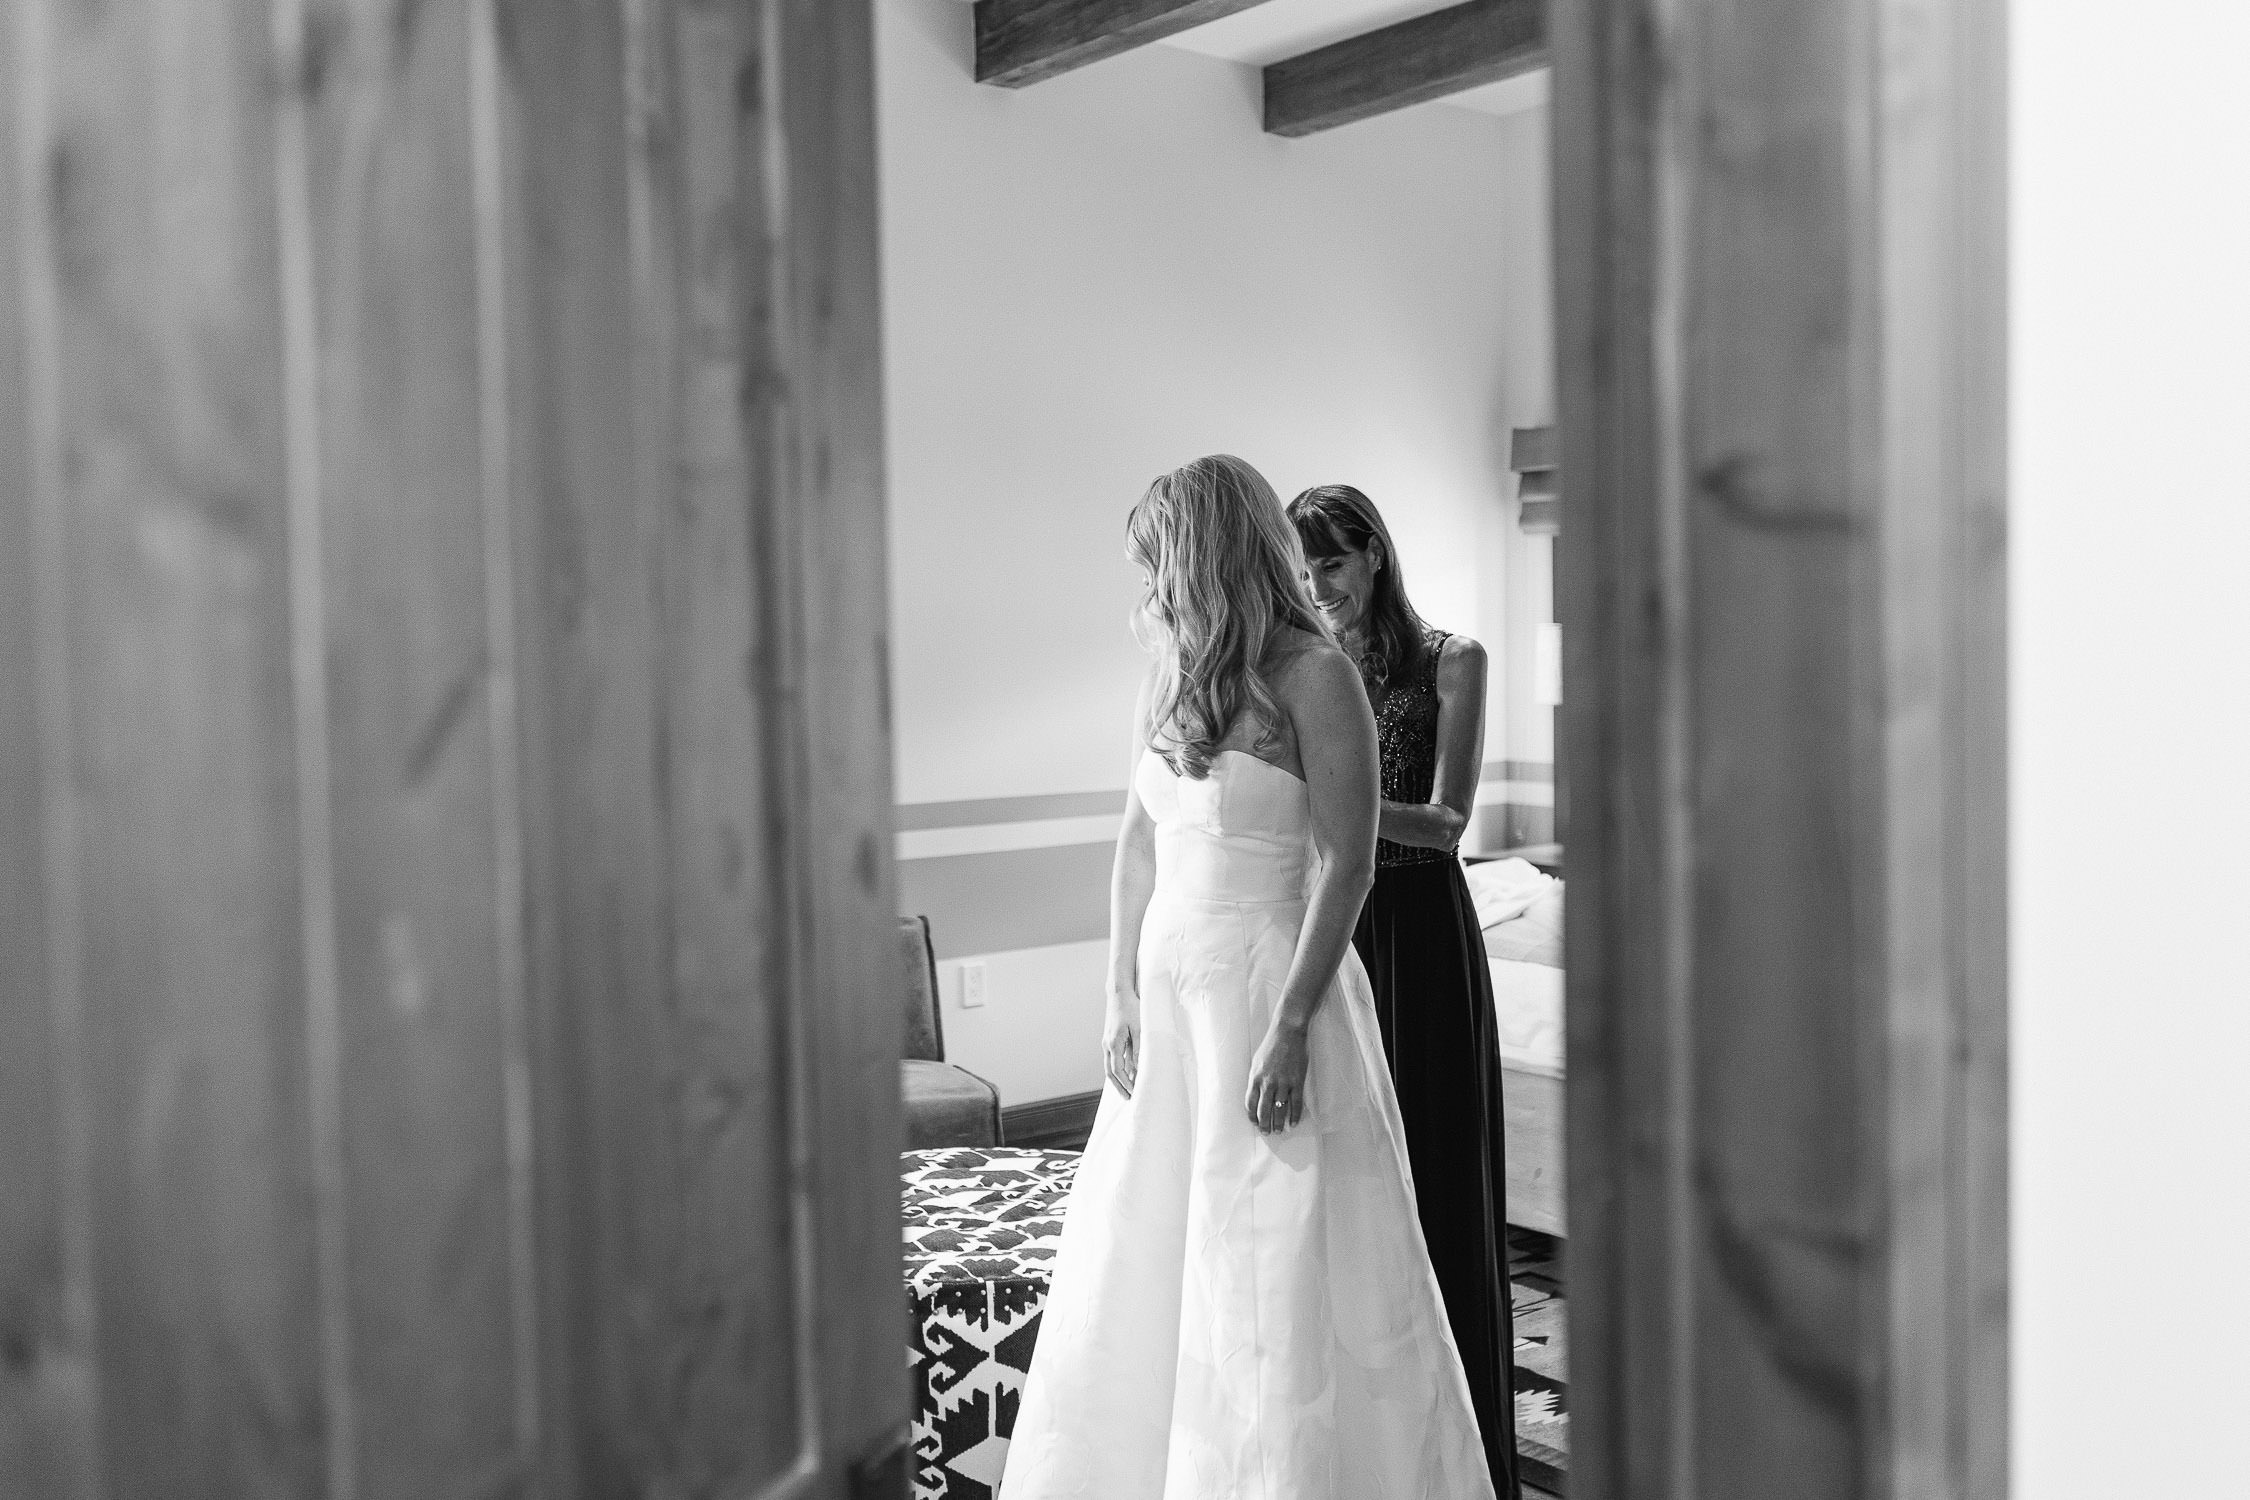 Black and white images of mother zipping up her daughter's dress on her wedding day.